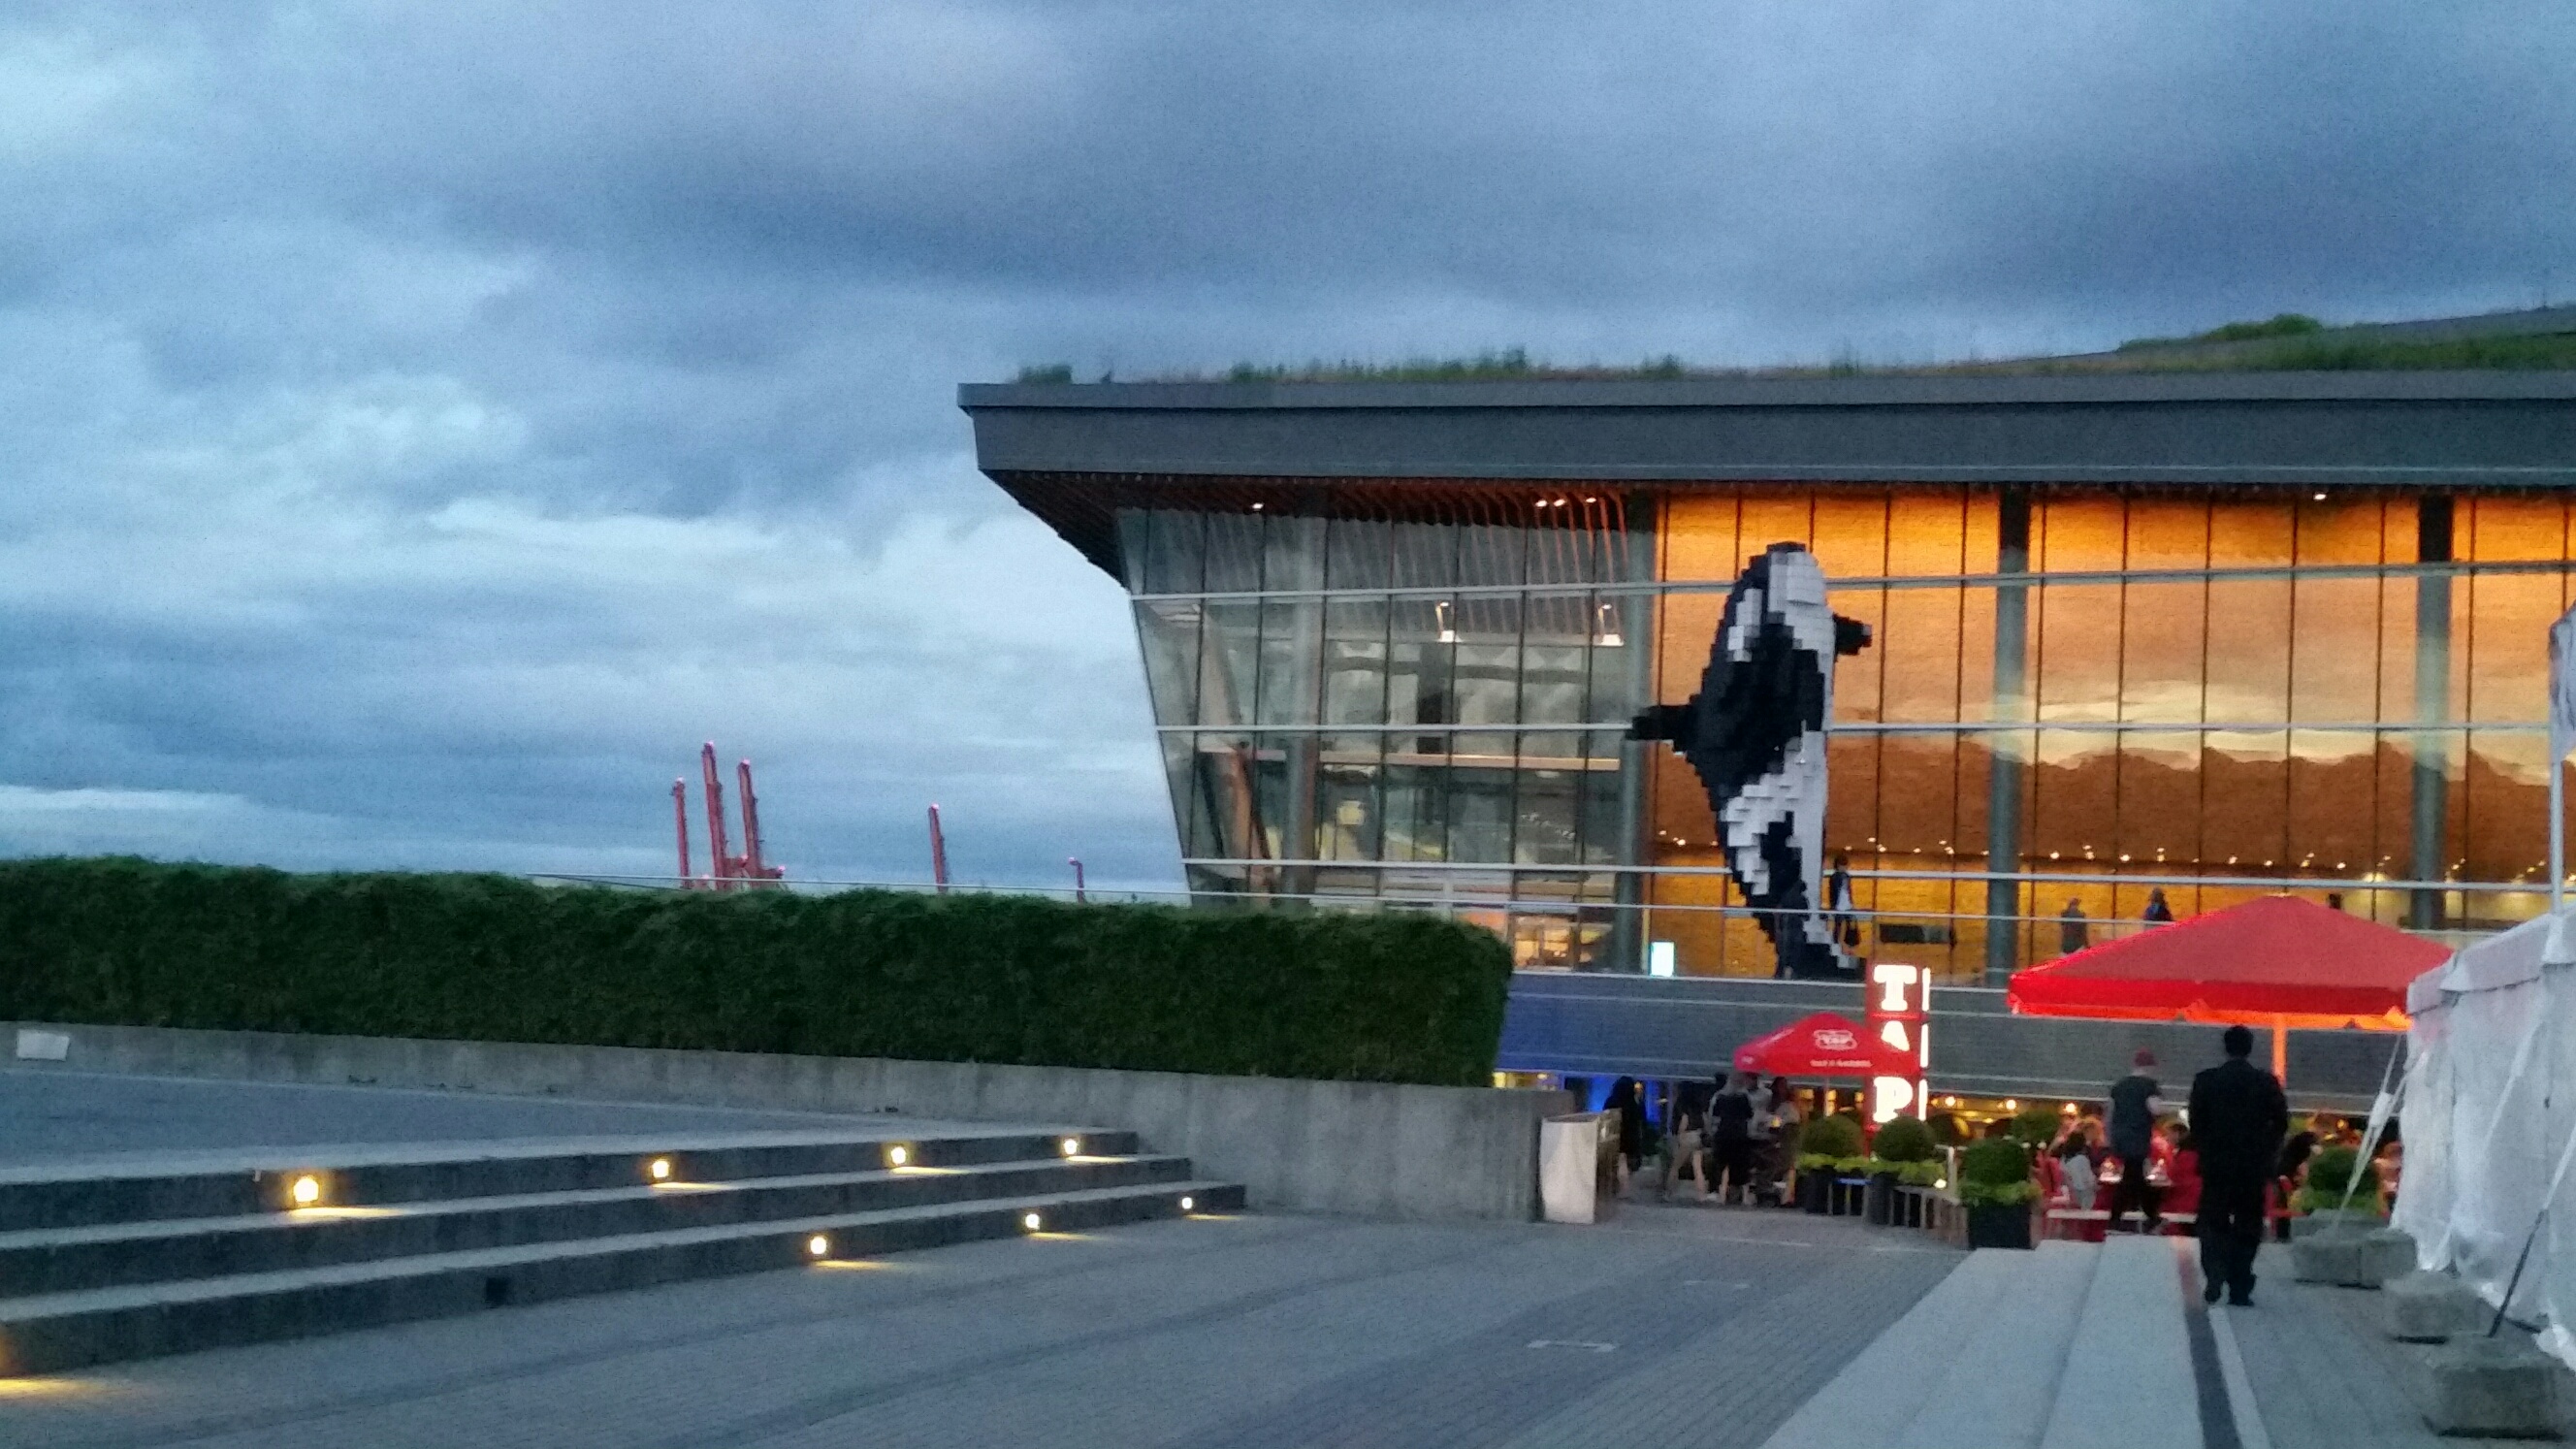 Vancouver convention center whale